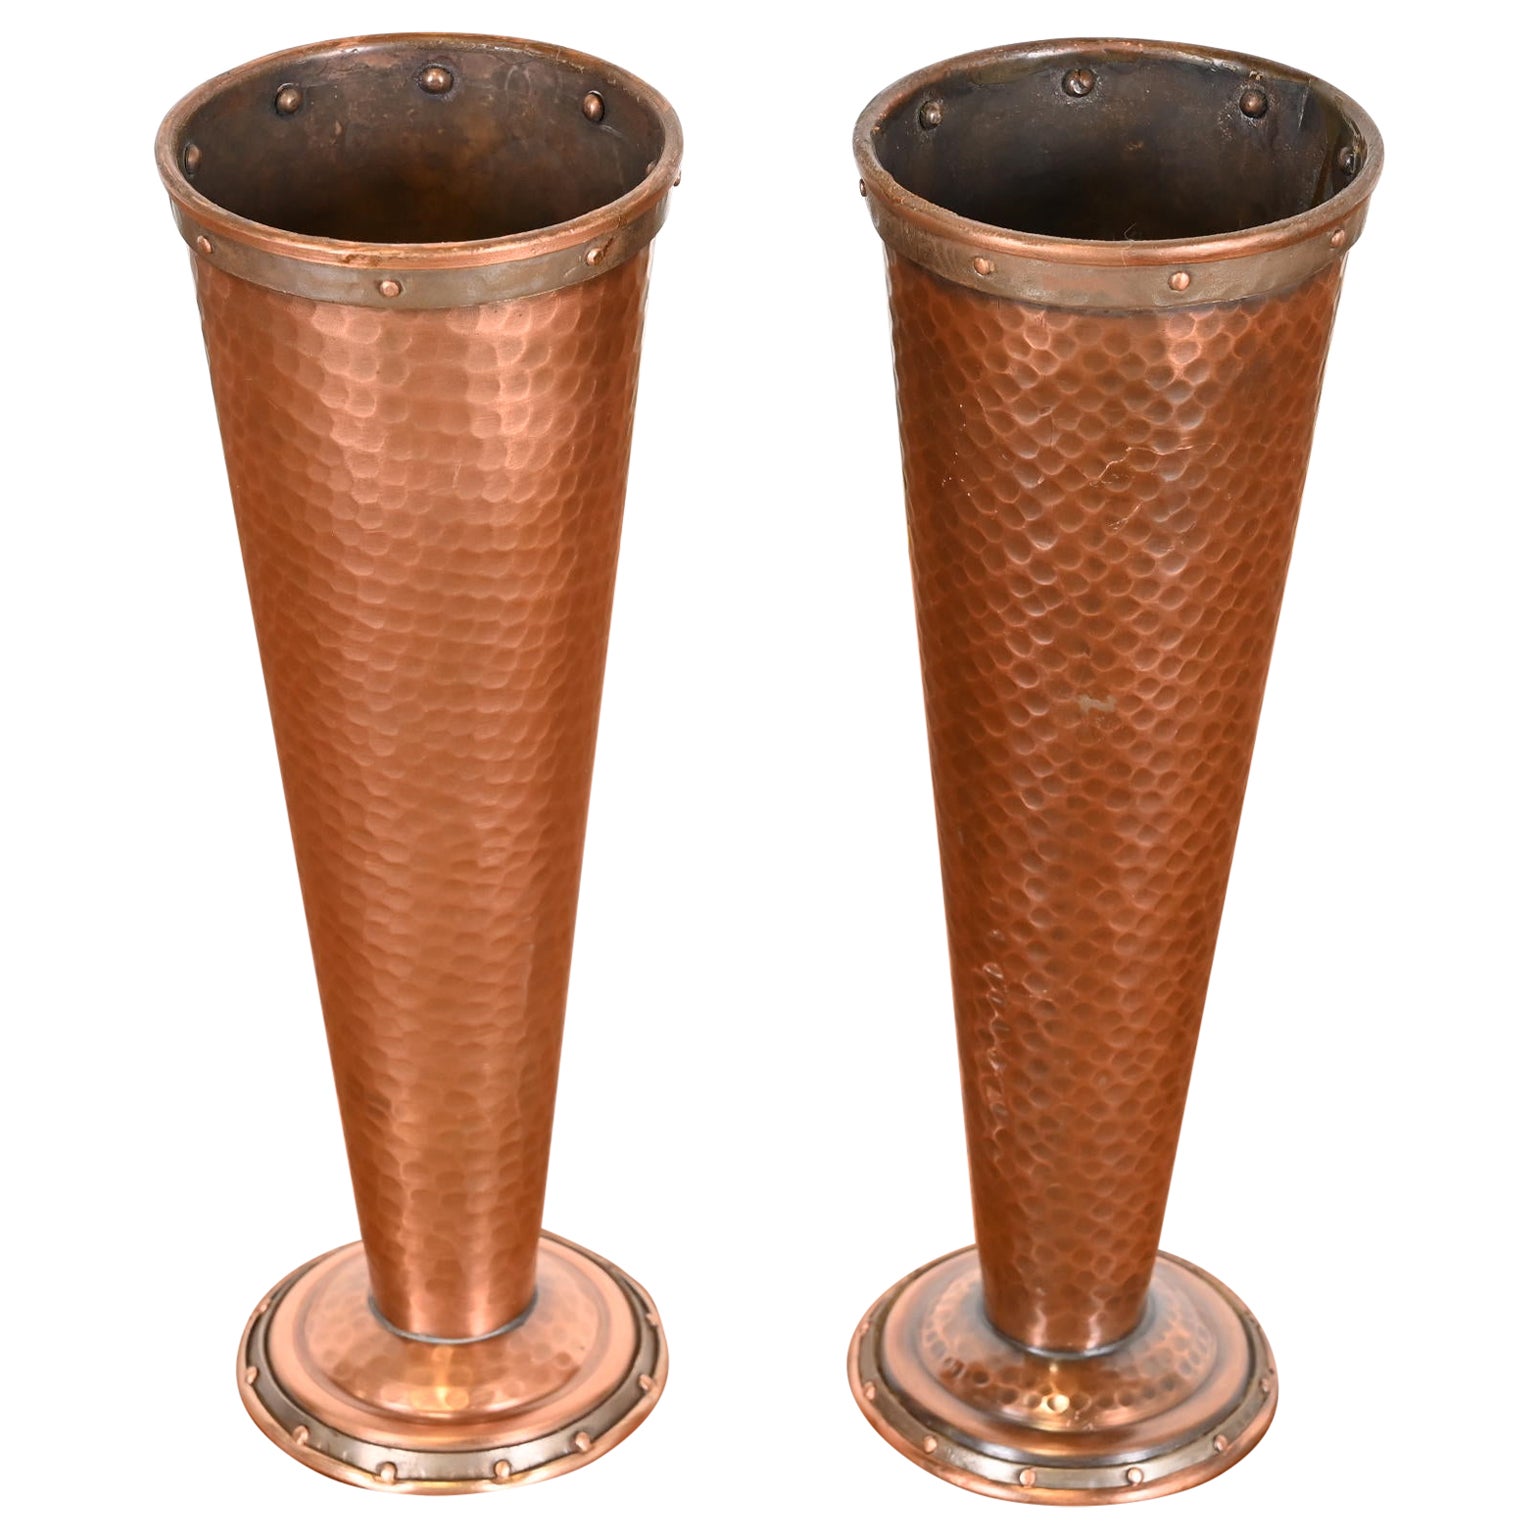 Joseph Heinrichs Style Arts and Crafts Hand-Hammered Copper Vases, Pair For Sale